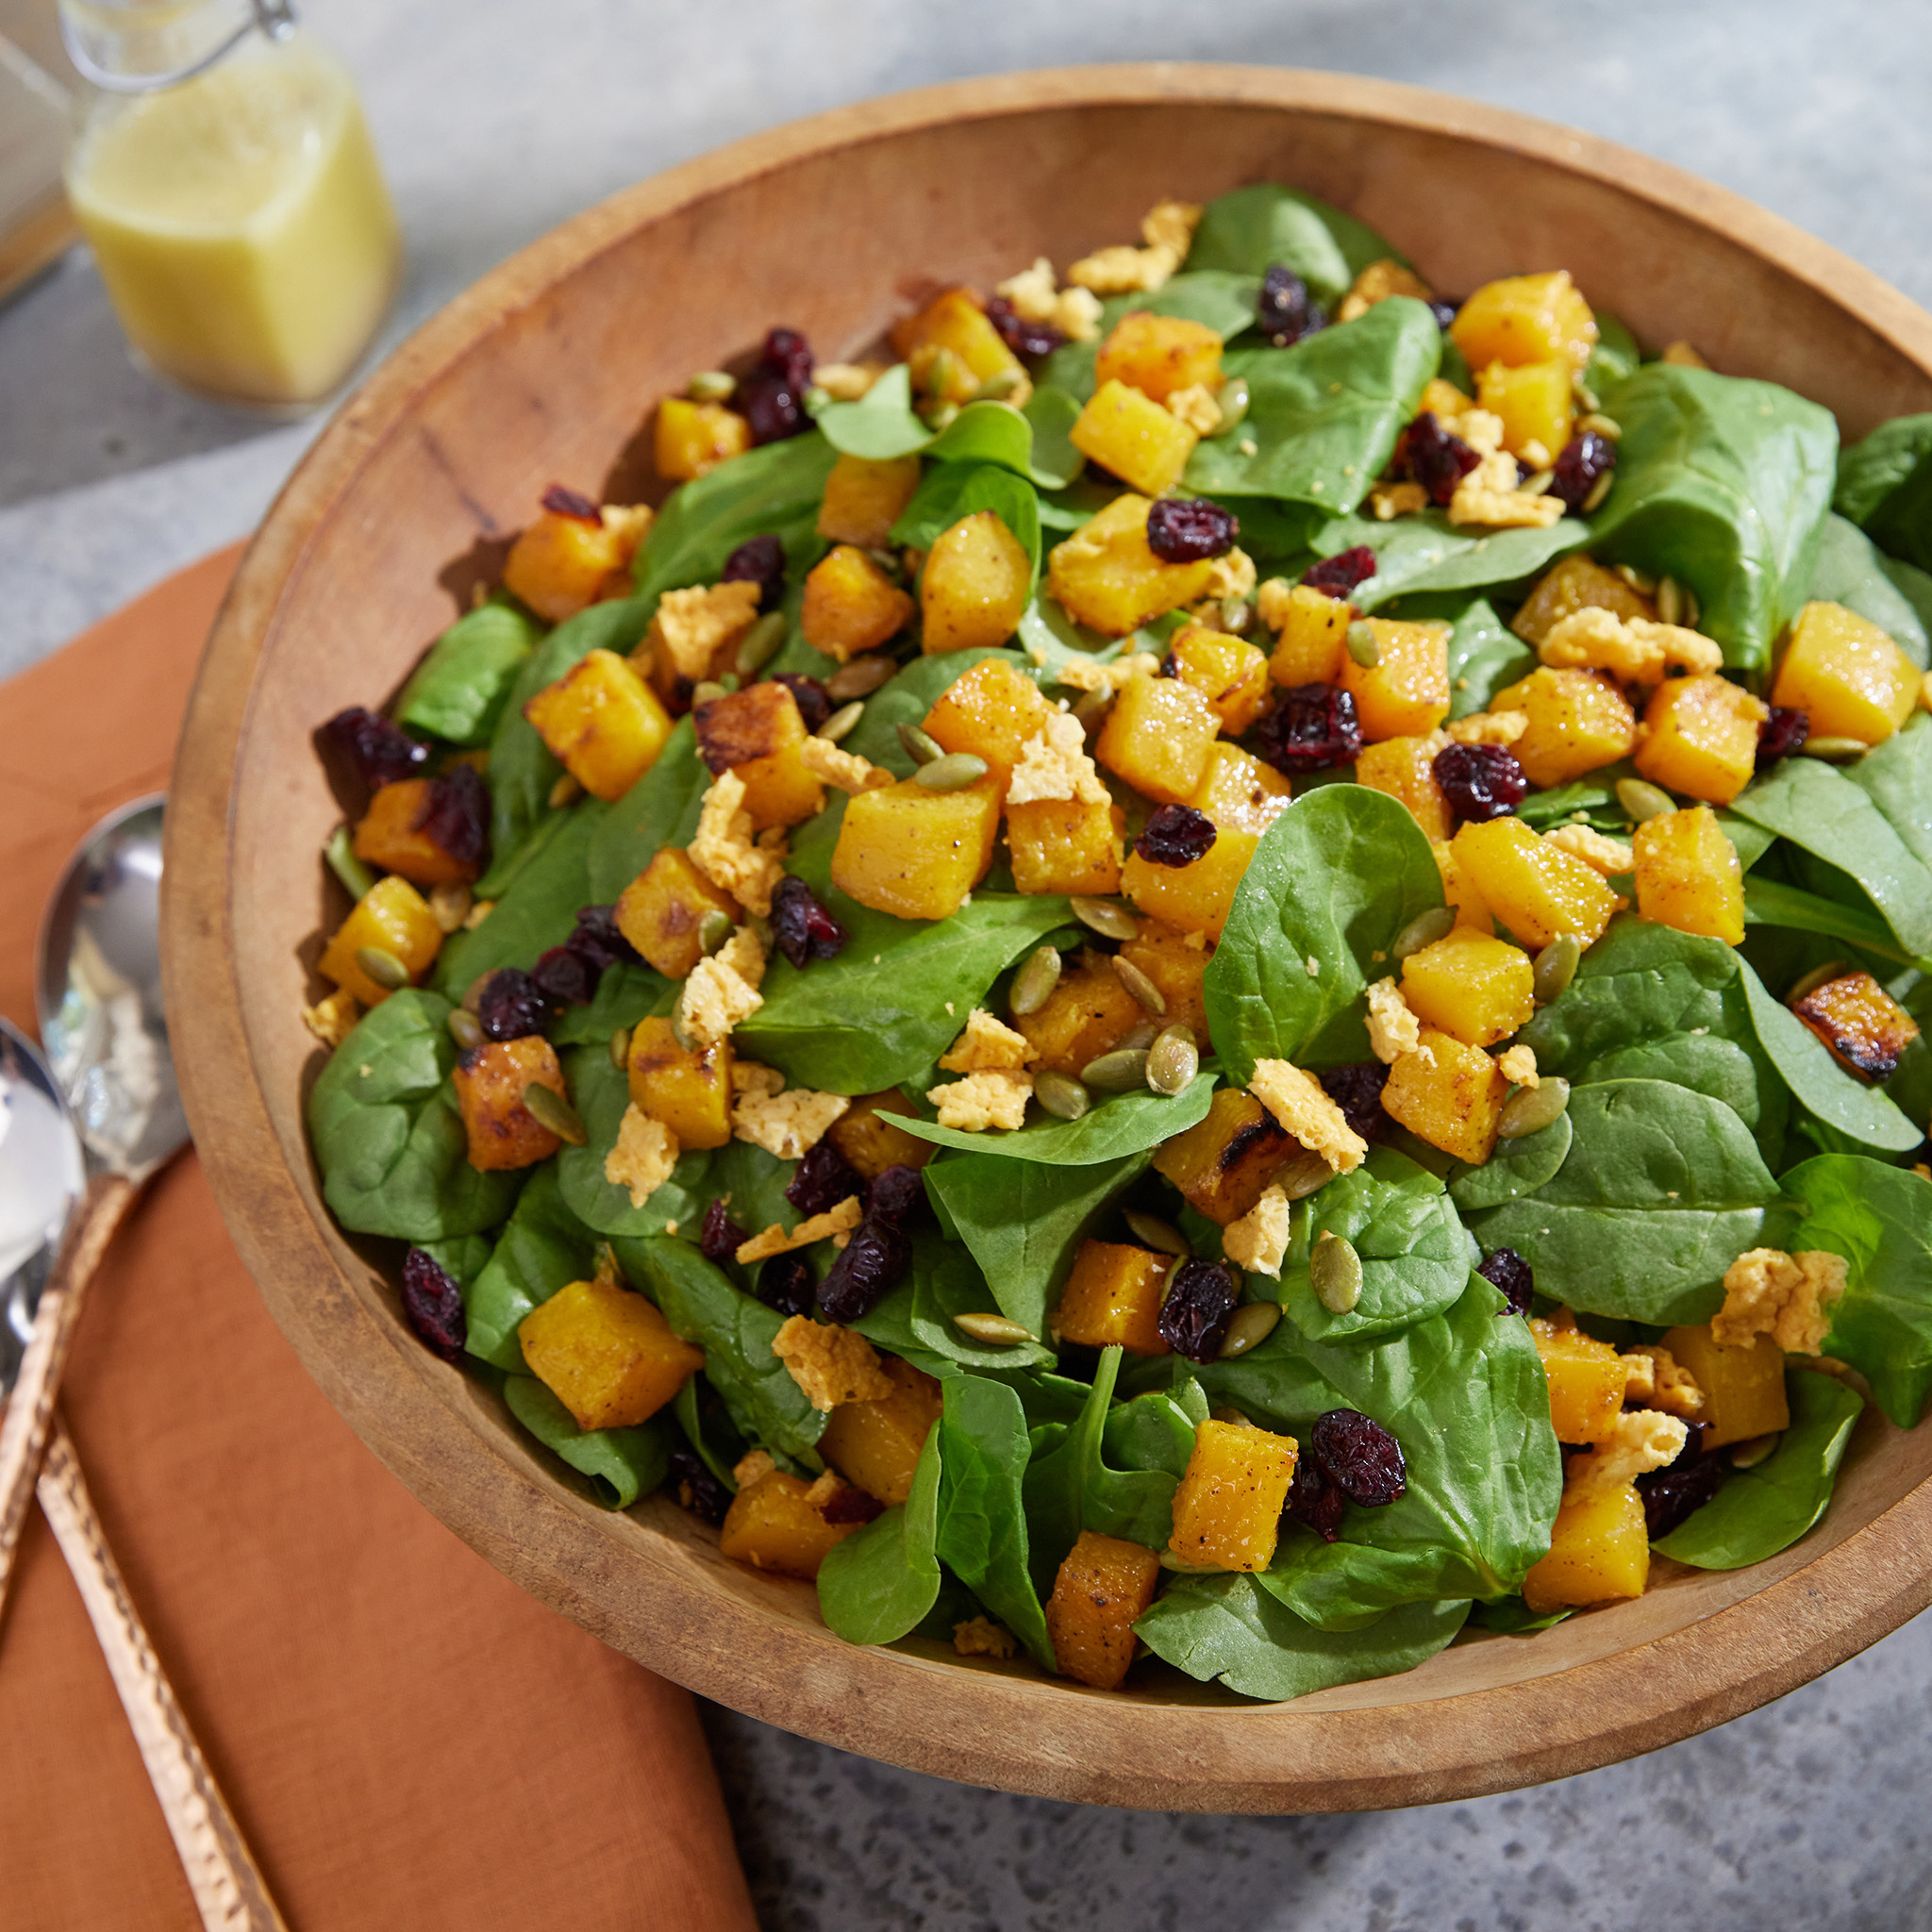 Joanna Gaines's Butternut Squash and Spinach Salad